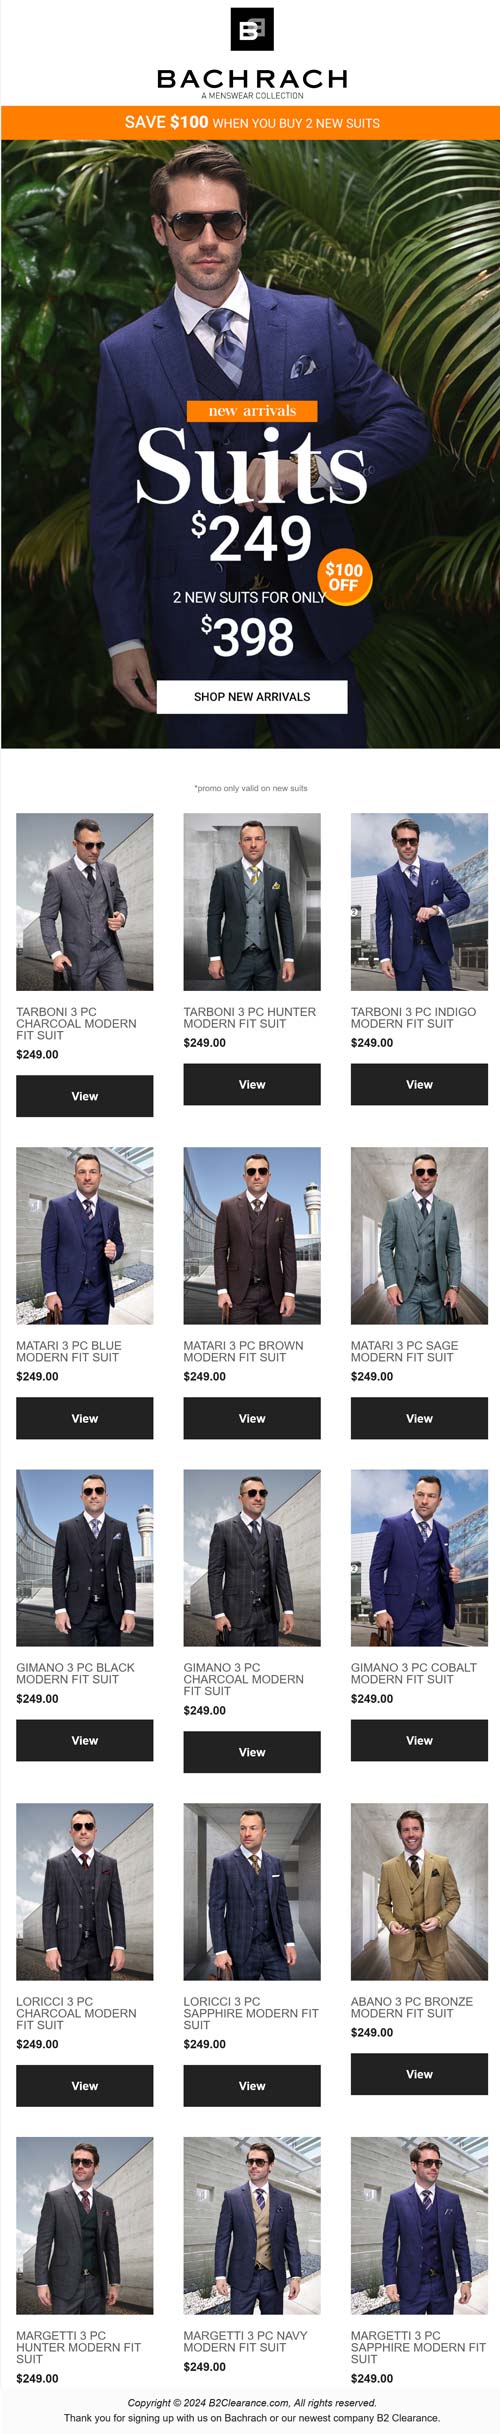 Bachrach stores Coupon  2 suits for $398 at Bachrach #bachrach 